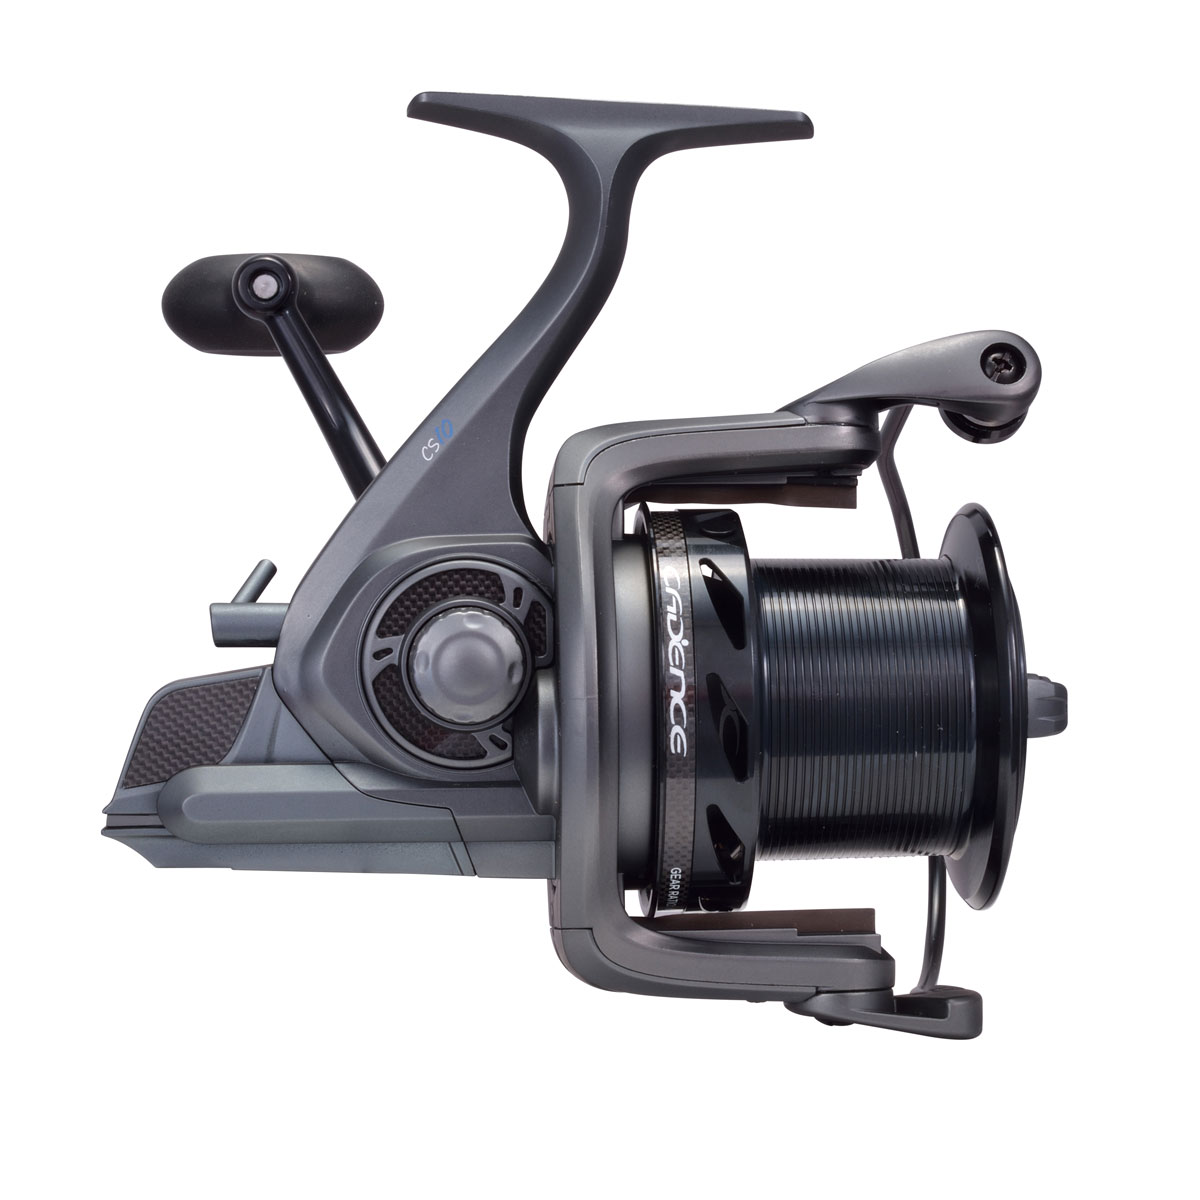 Cadence CS10 4000 Reel review 2 years on and Cadence CS5 4000 reel review 